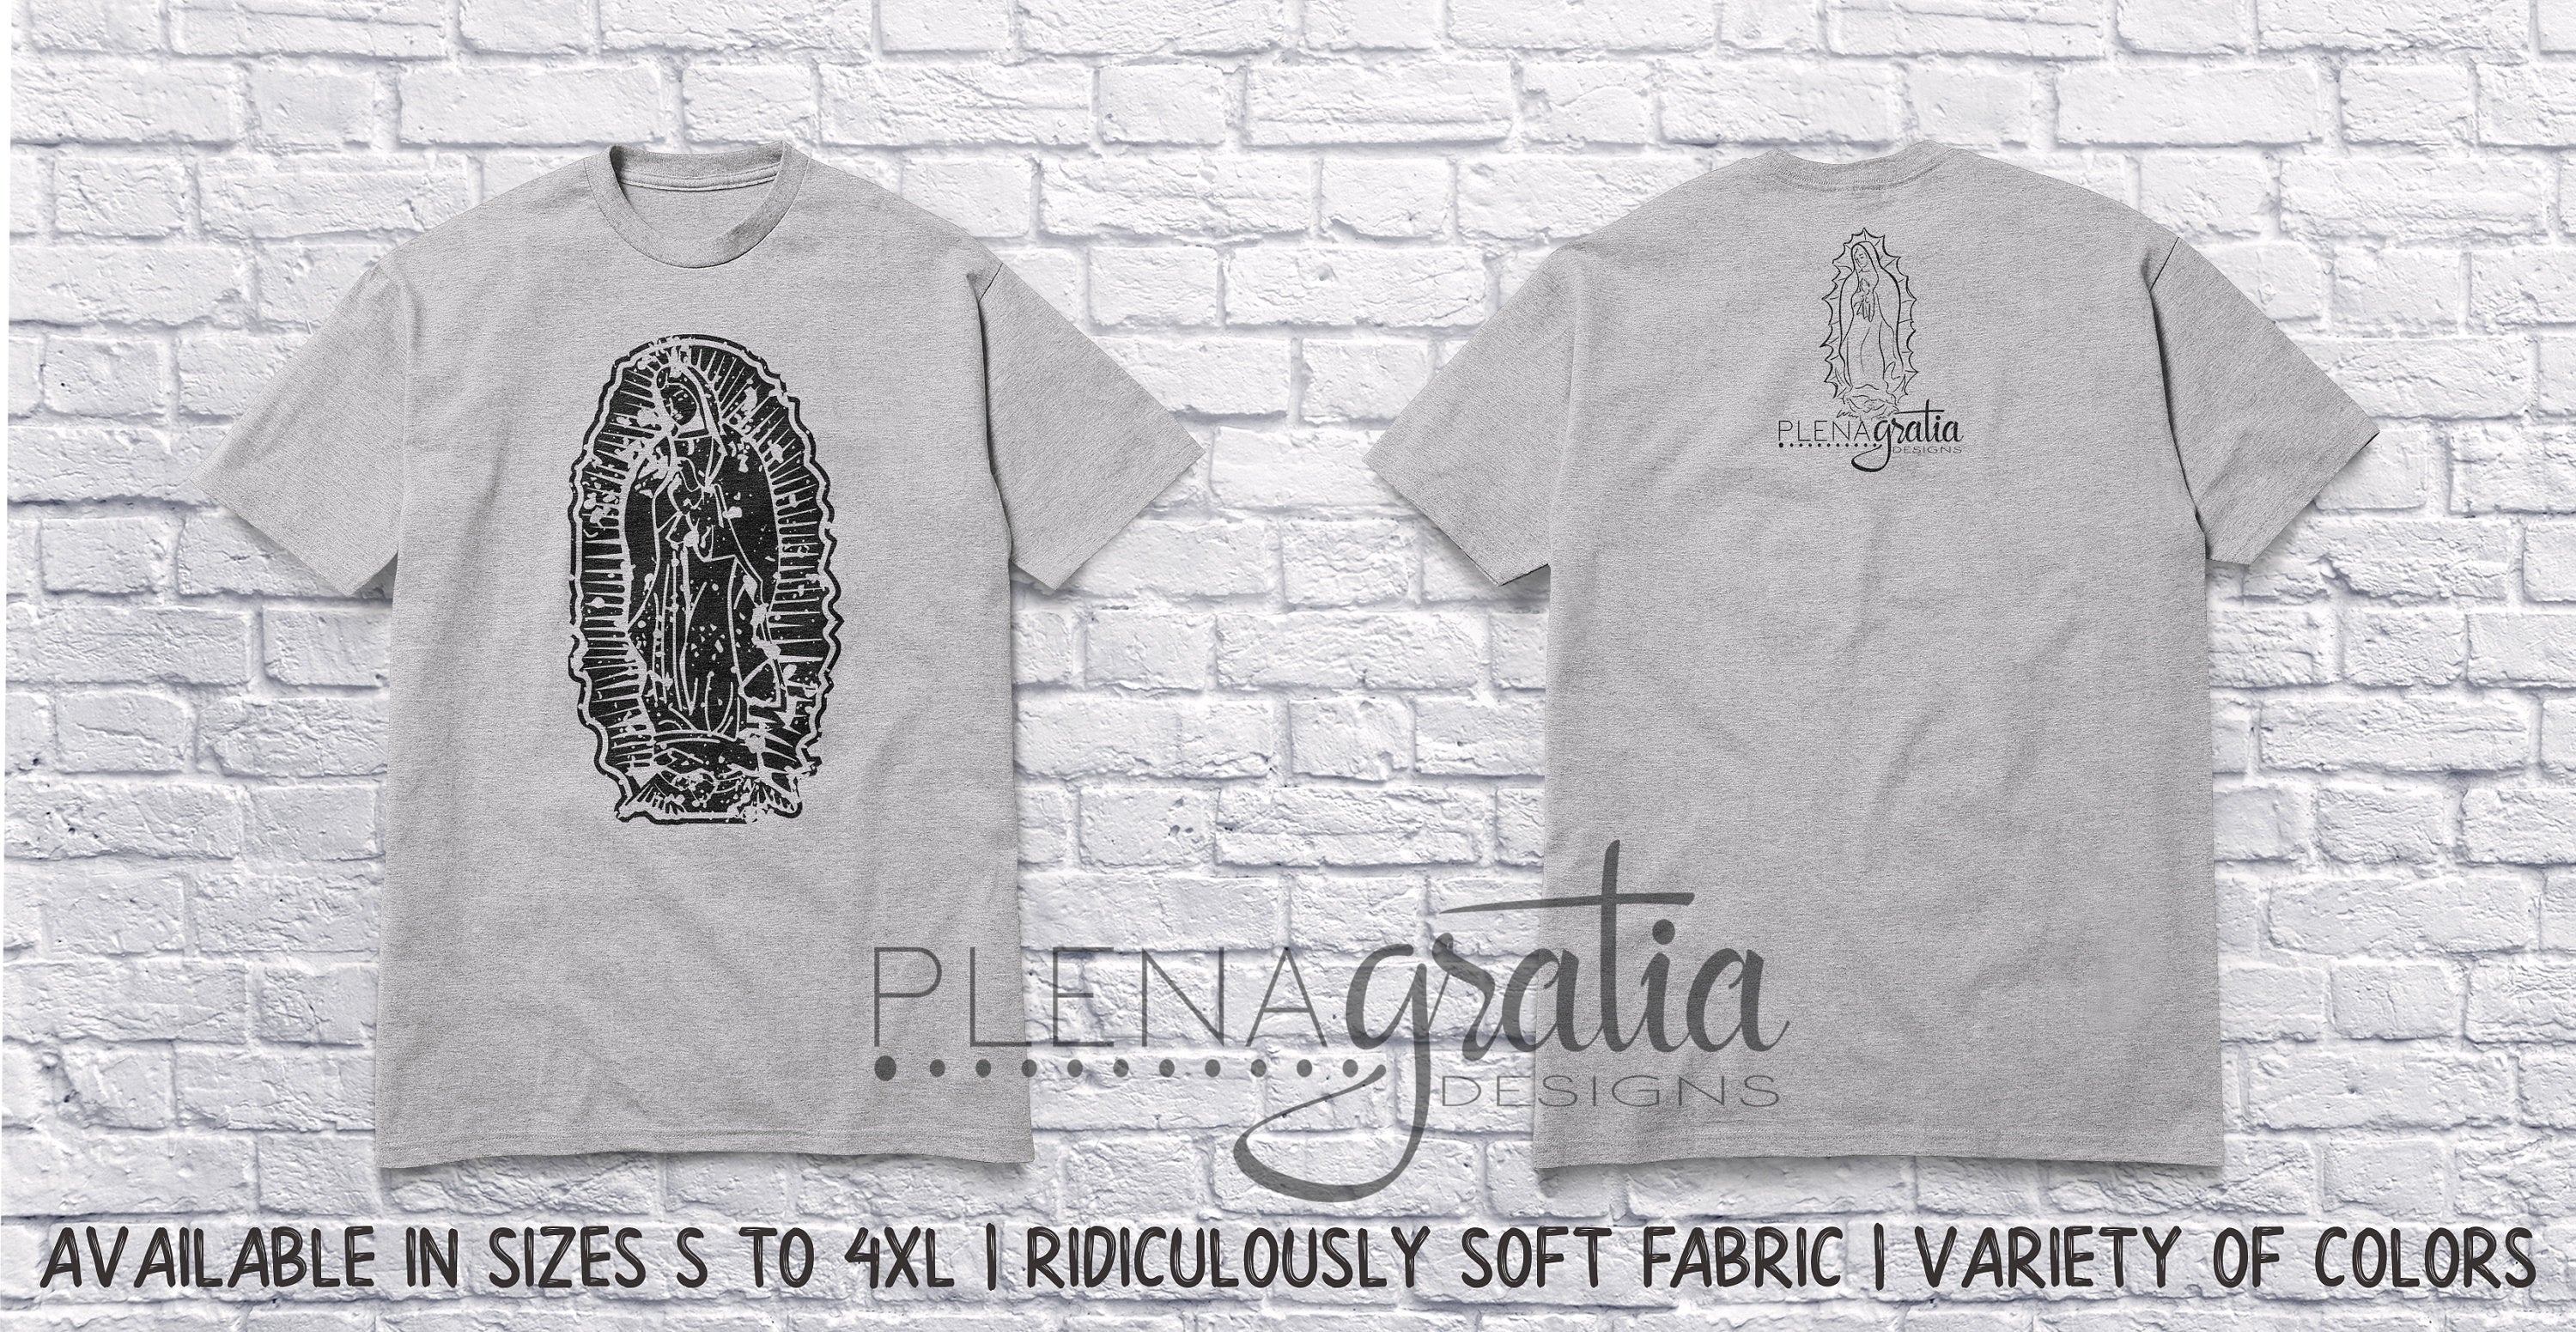 Distressed Our Lady of Guadalupe | Dark Print on Light Shirt | Catholic Shirt